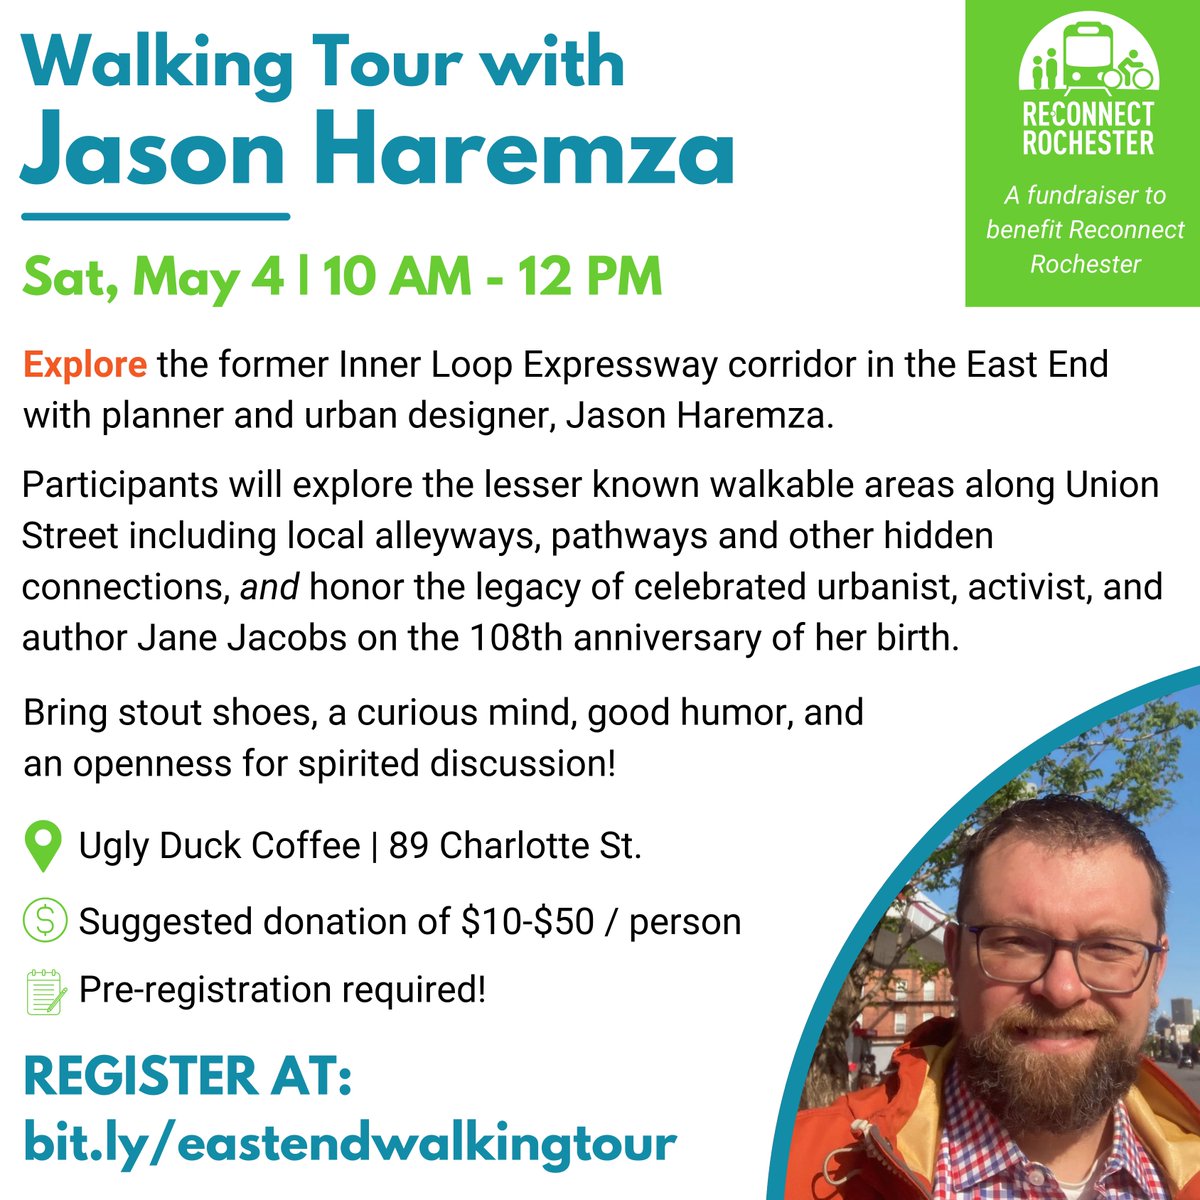 Join local urban planner and designer, Jason Haremza, for a Walking Tour of the former #InnerLoopEast corridor. What was once an under-utilized inner-city highway, is now a thriving neighborhood well connected by different modes of transit. REGISTER: bit.ly/eastendwalking…